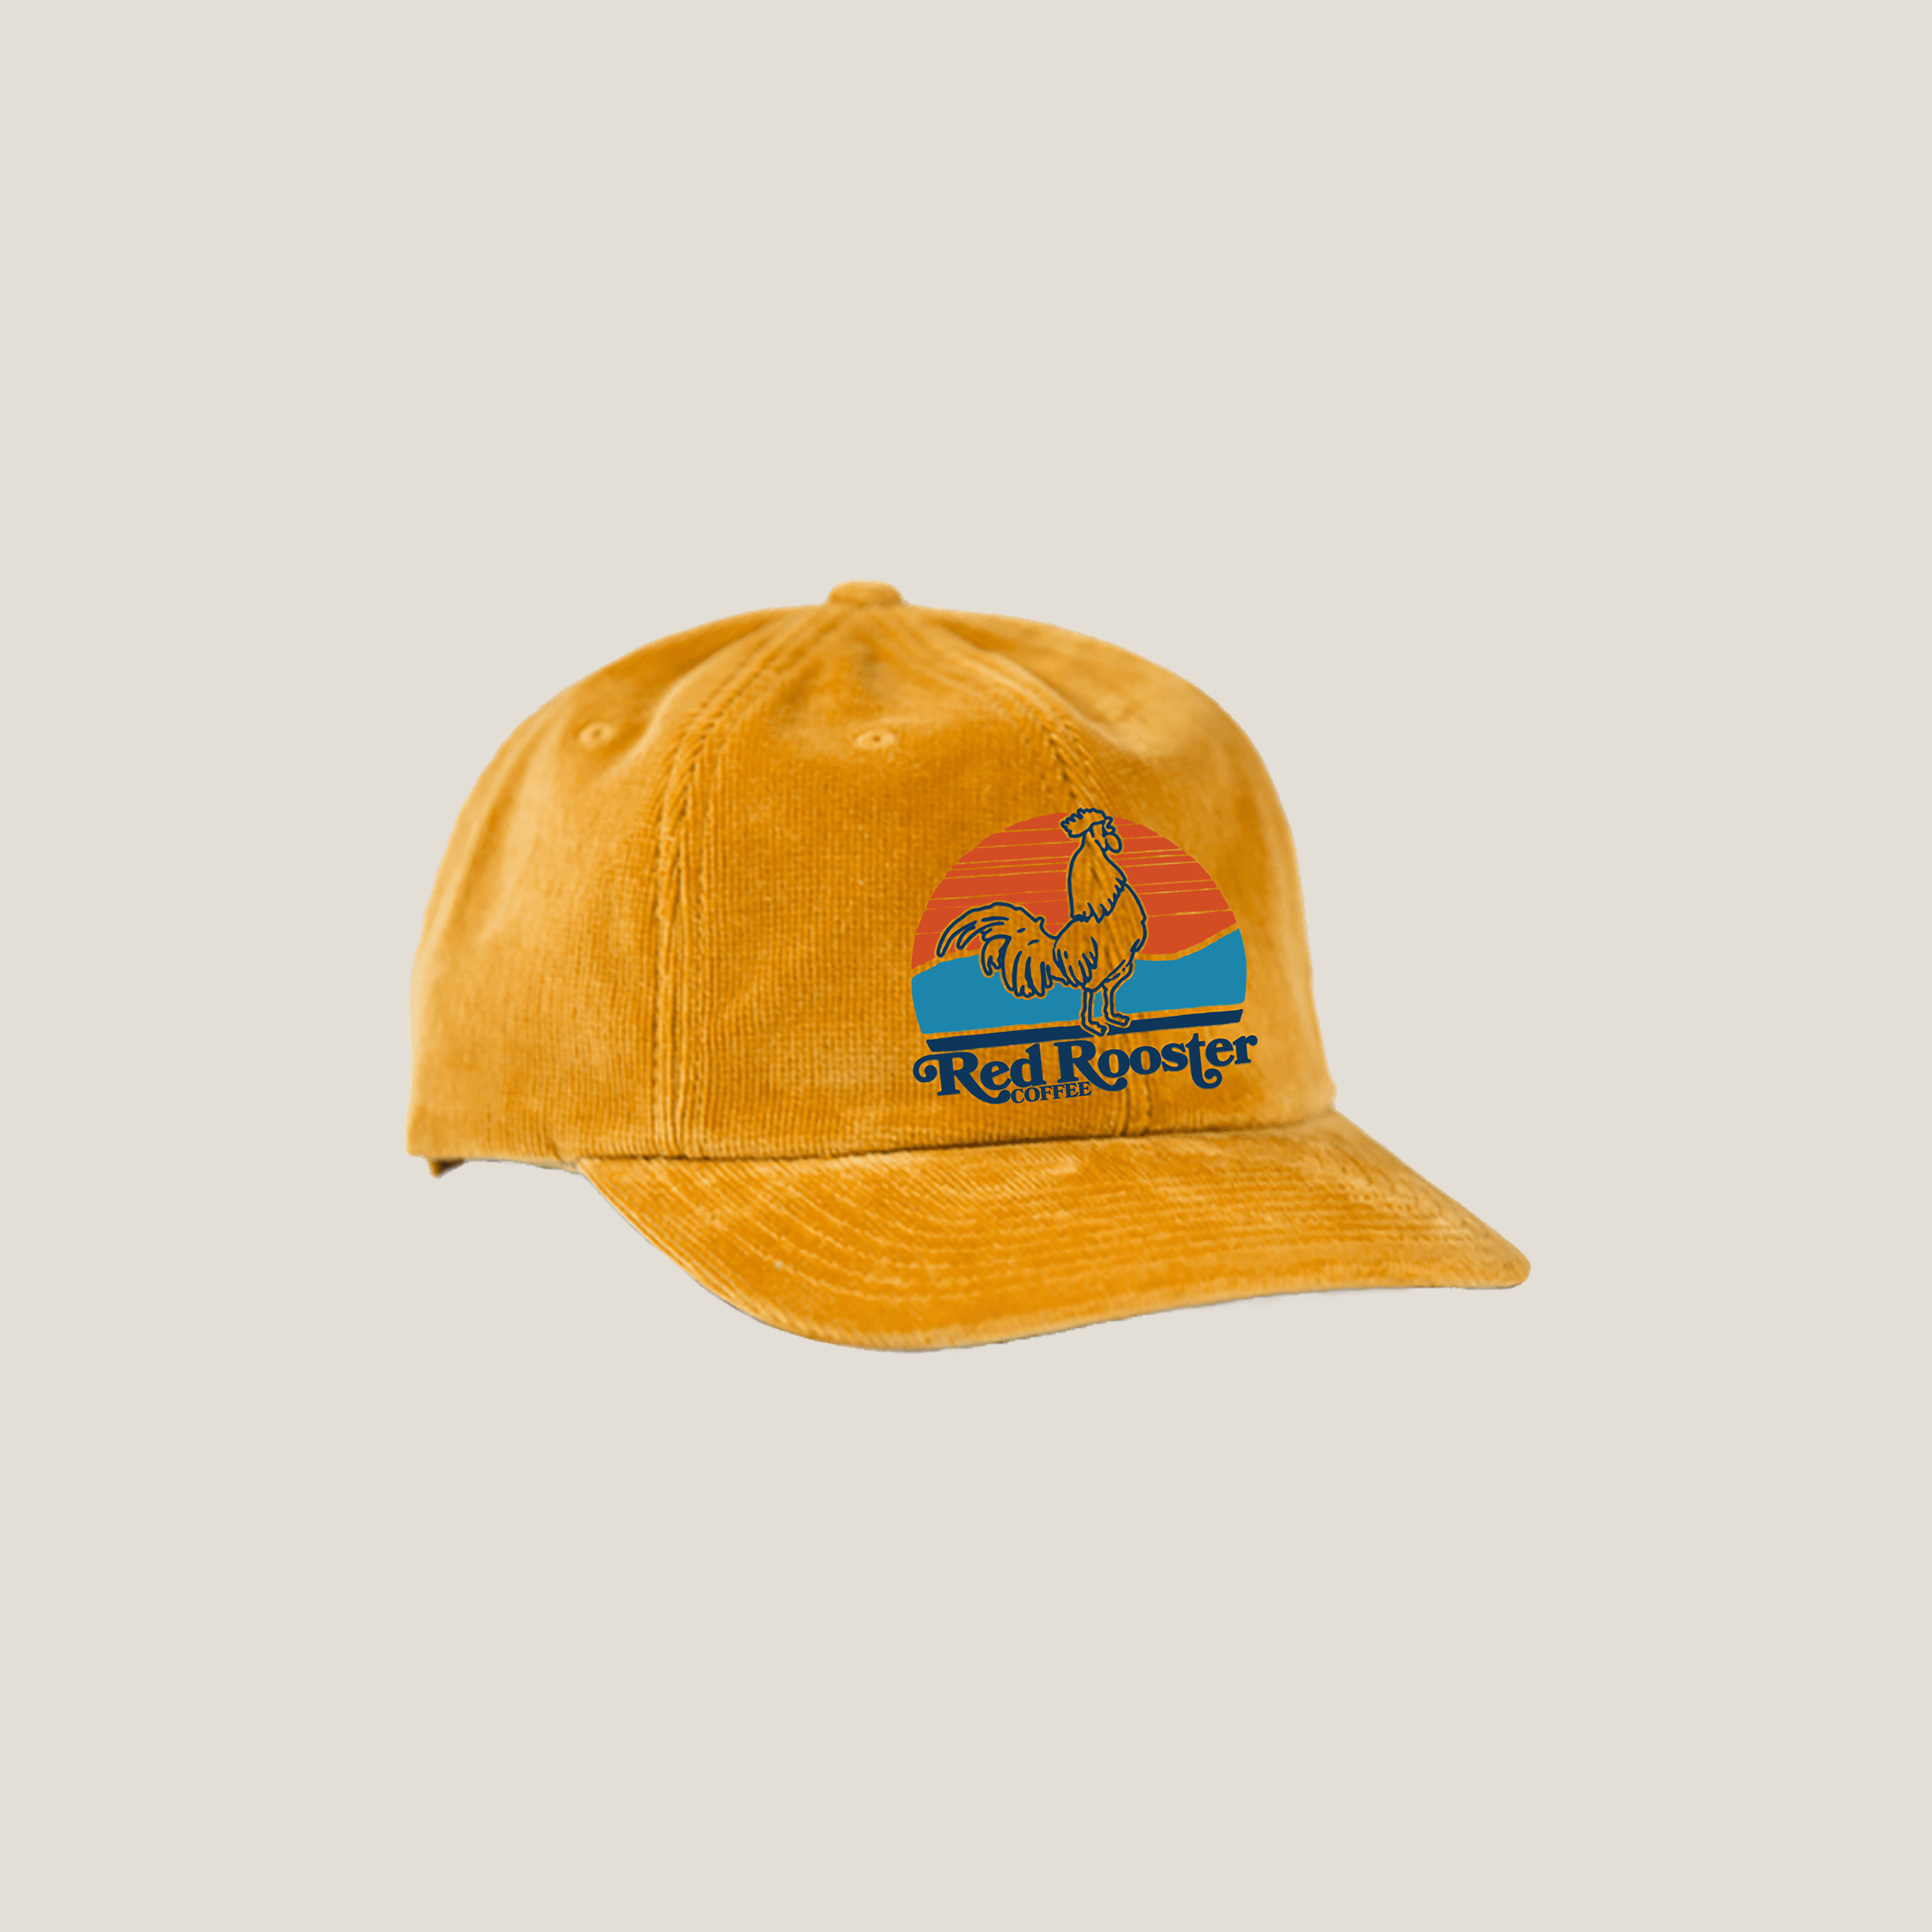 Corduroy Dad Hat - Red Rooster Coffee